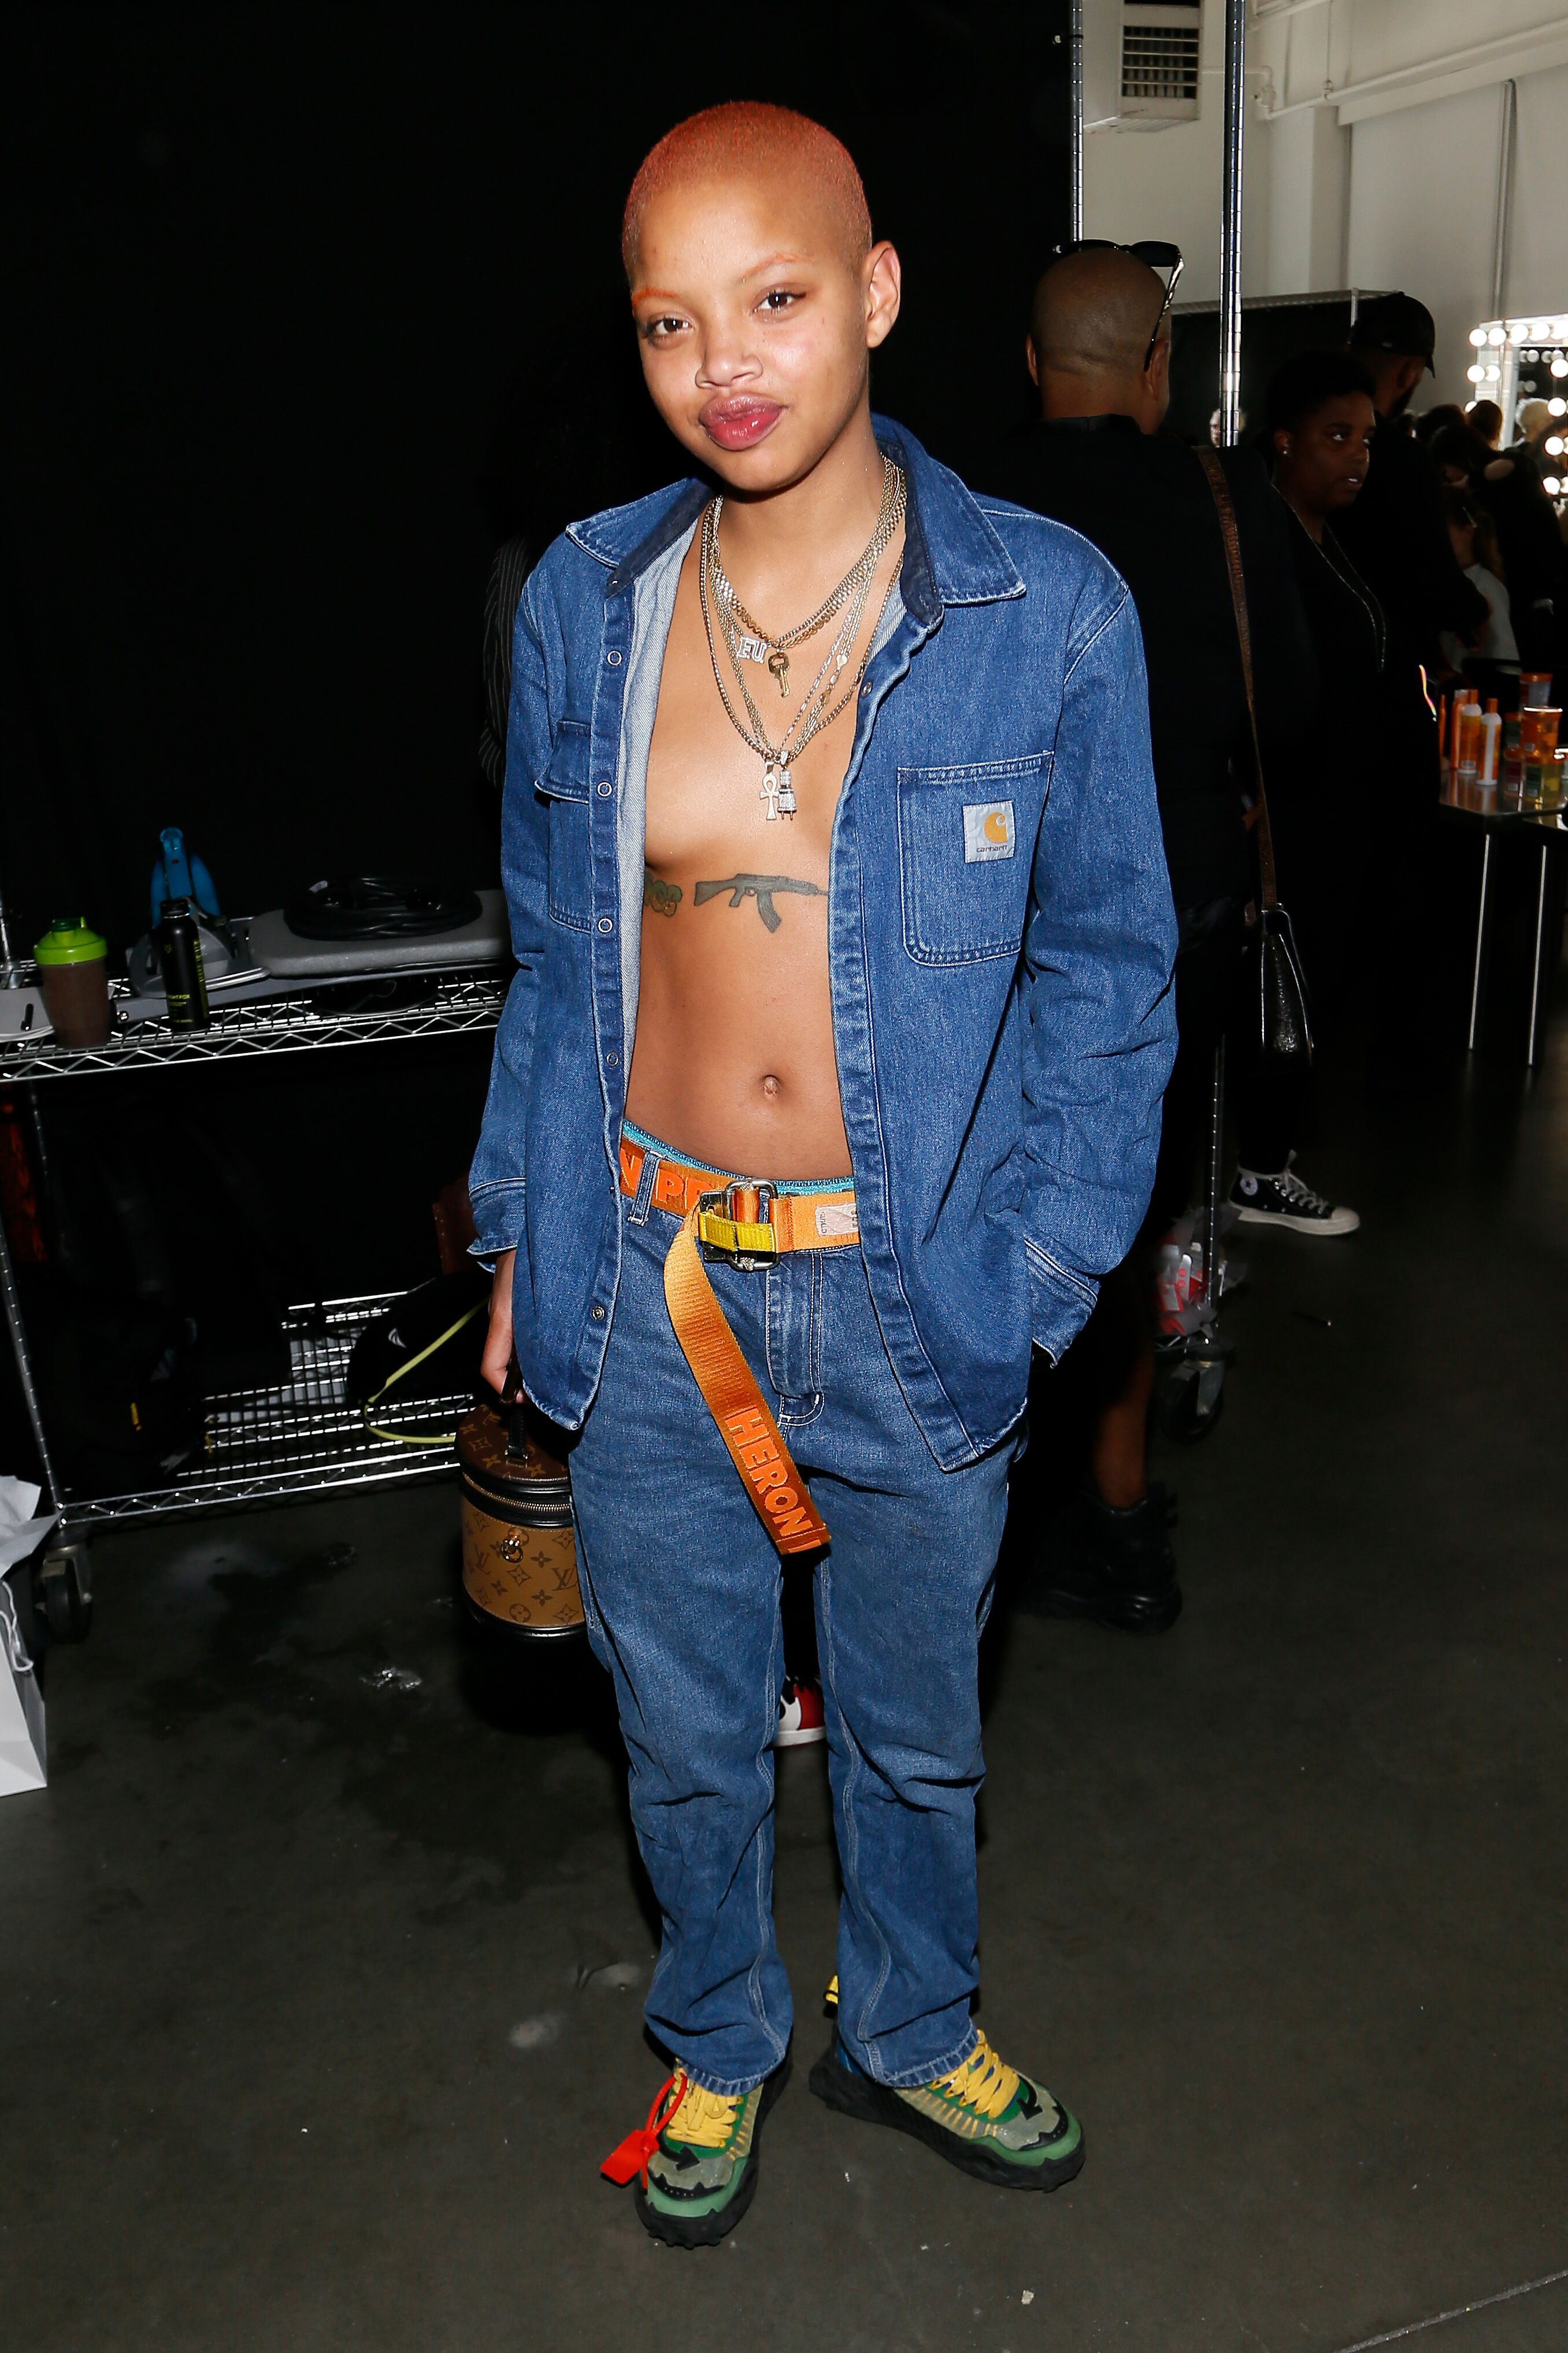 Model Slick Woods at the 2019 Tribeca Film Festival/ Source: Getty Images